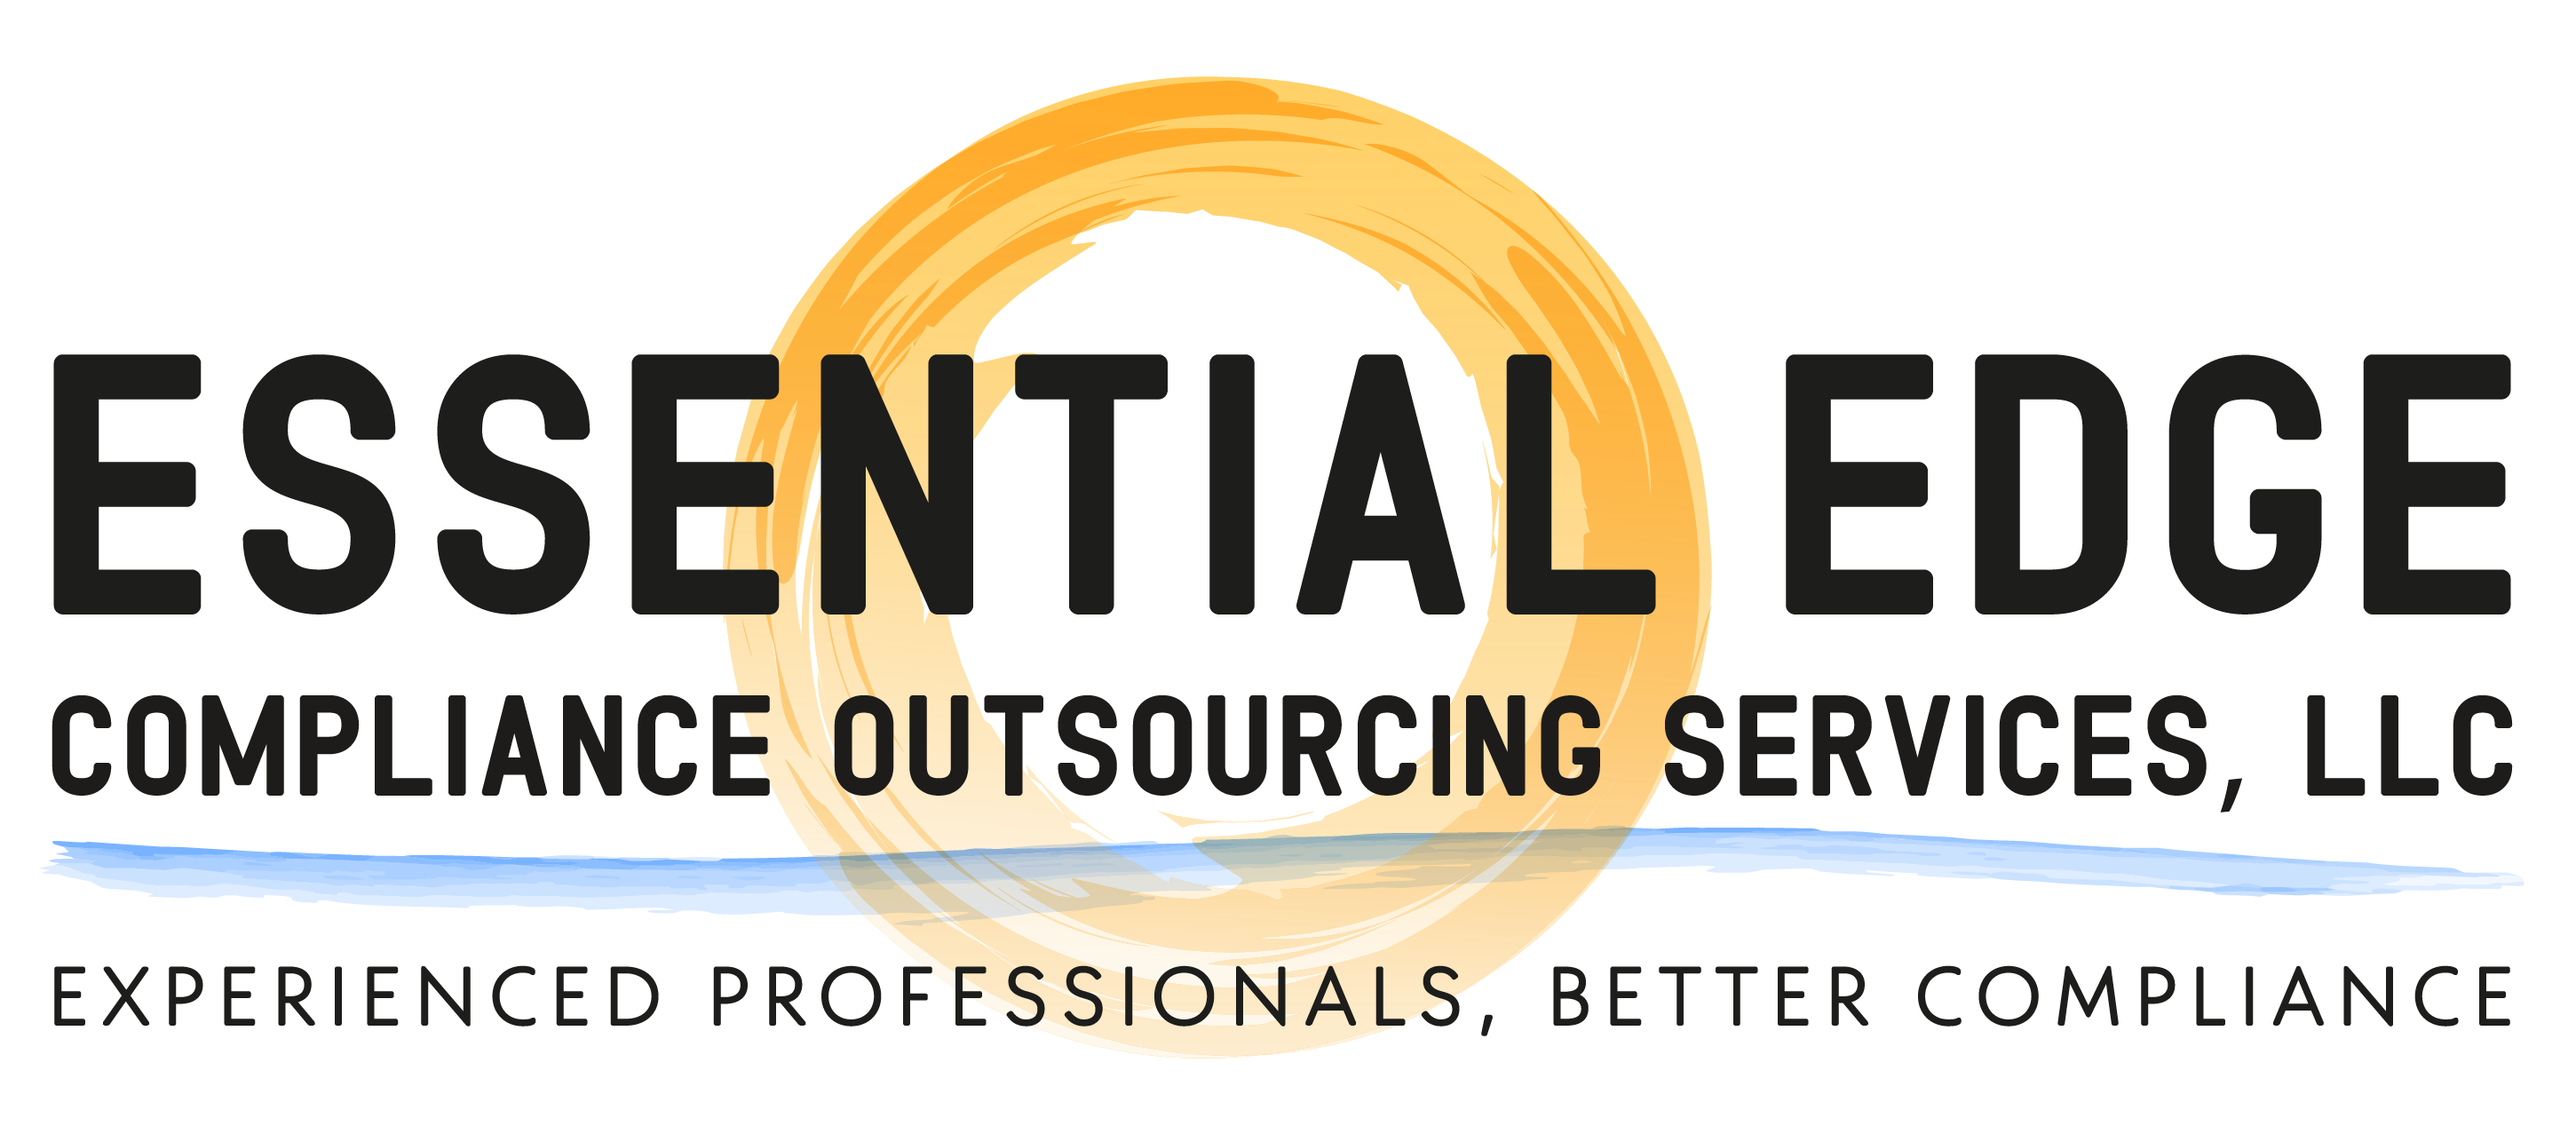 Essential Edge Compliance Outsourcing Services, LLC